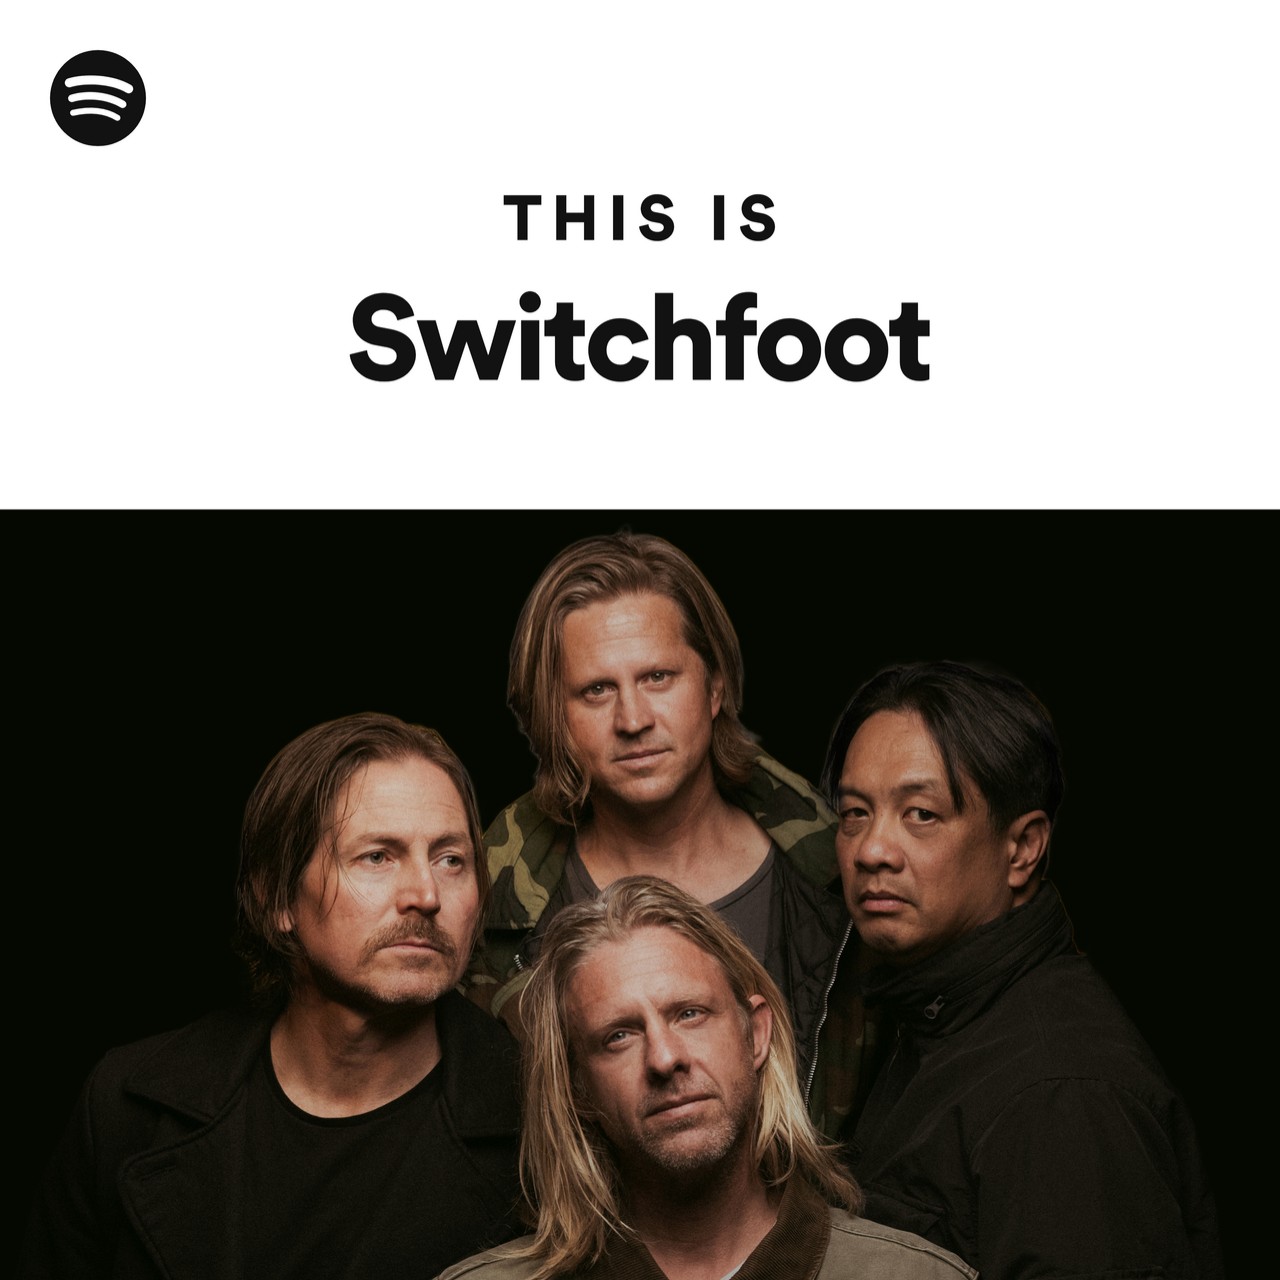 This Is Switchfoot